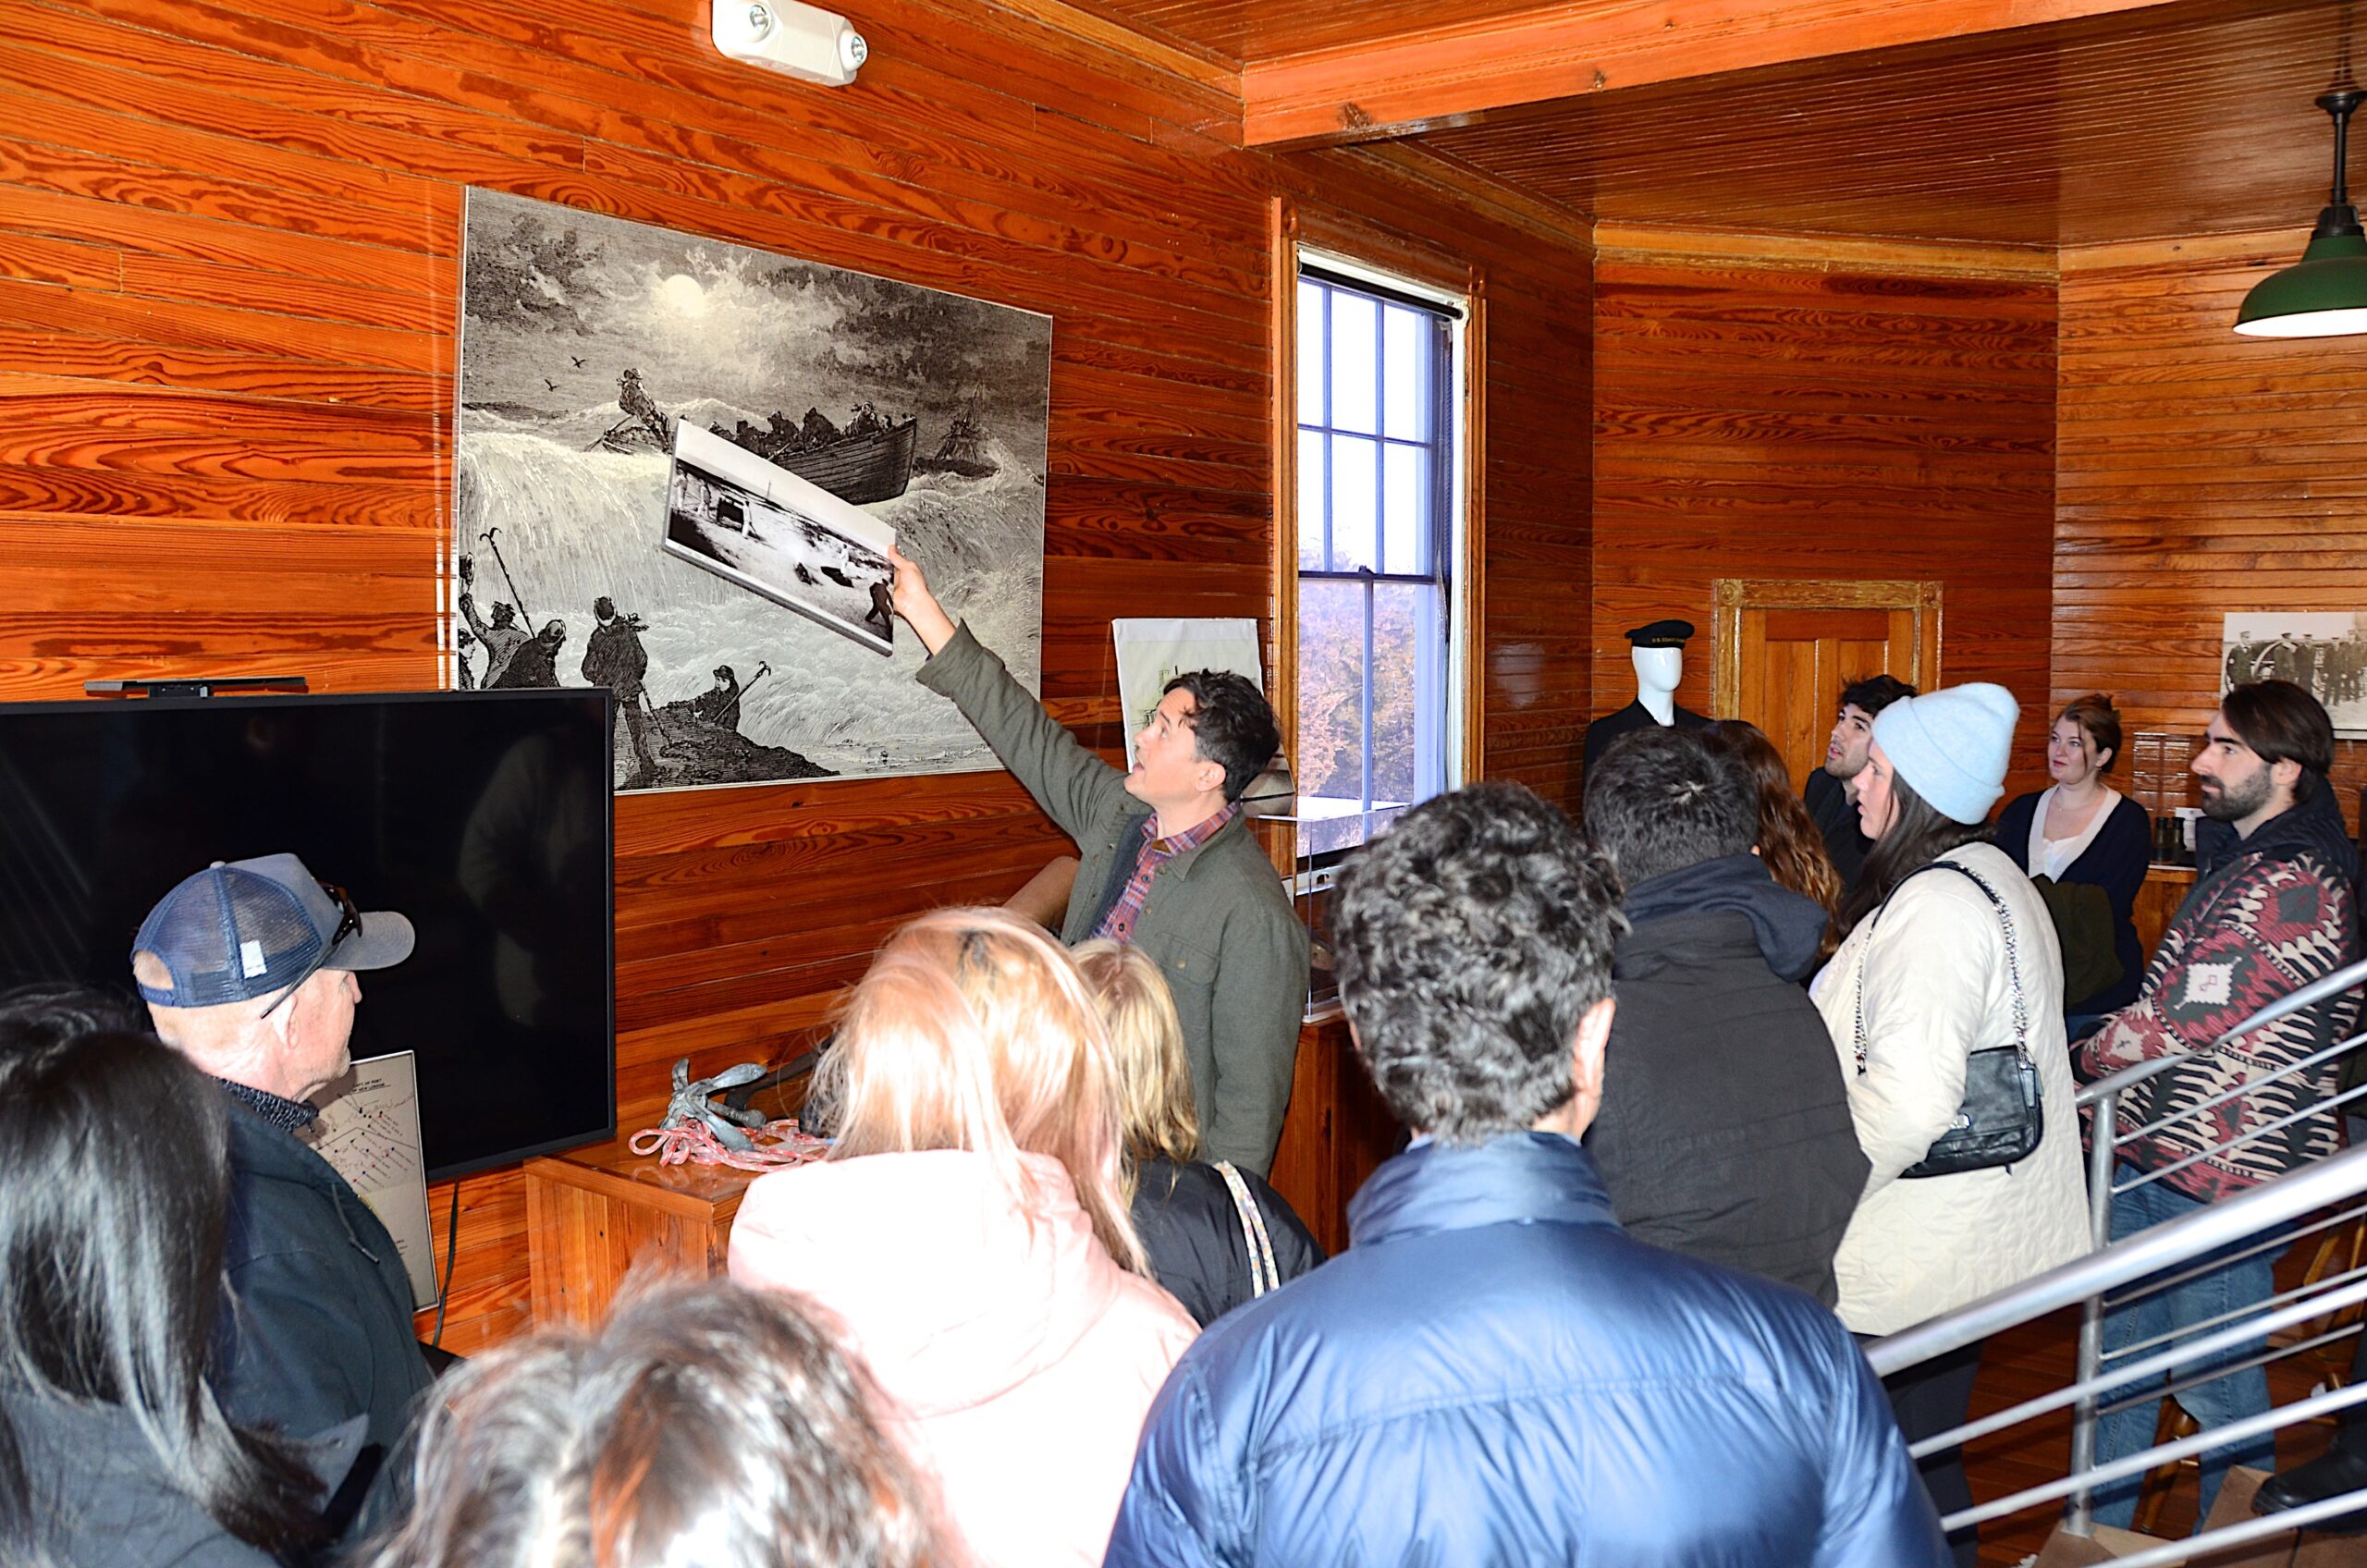 To inform their design of a modern station, the students got a history lesson in the background of the Amagansett Life Saving Station from David Cataletto, a teacher and member of the historic station's board of directors.